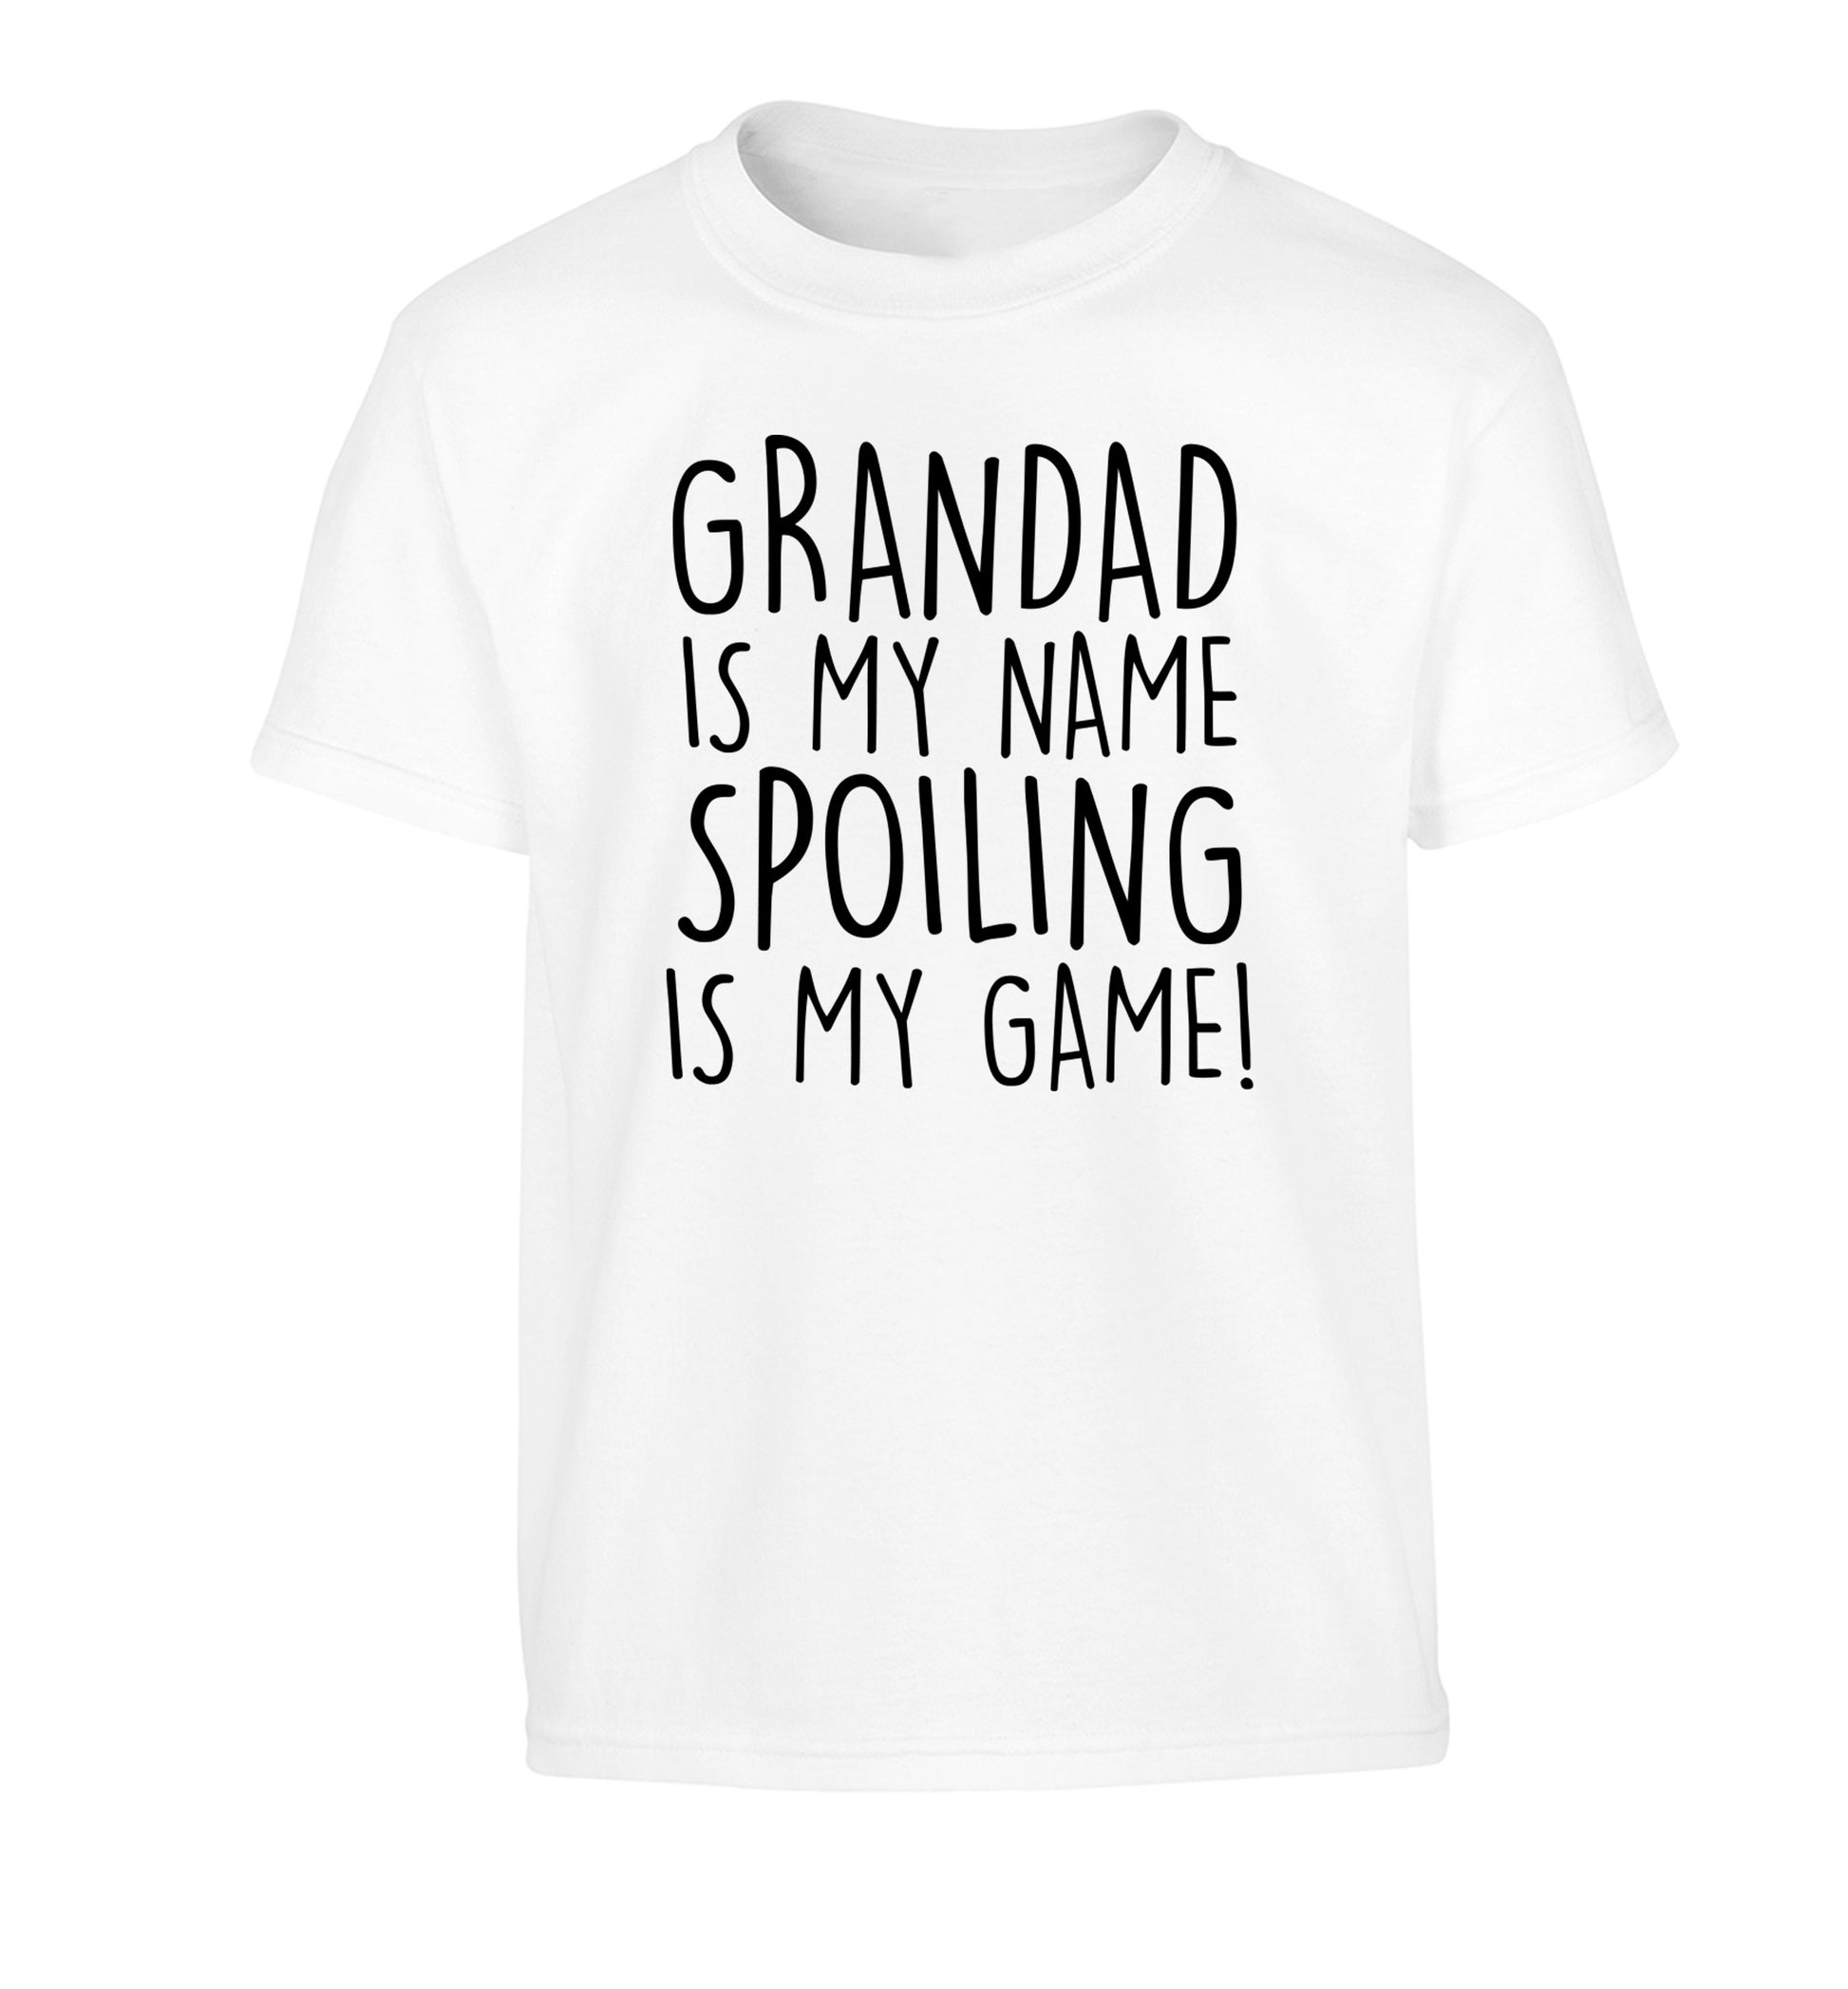 Grandad is my name, spoiling is my game Children's white Tshirt 12-14 Years